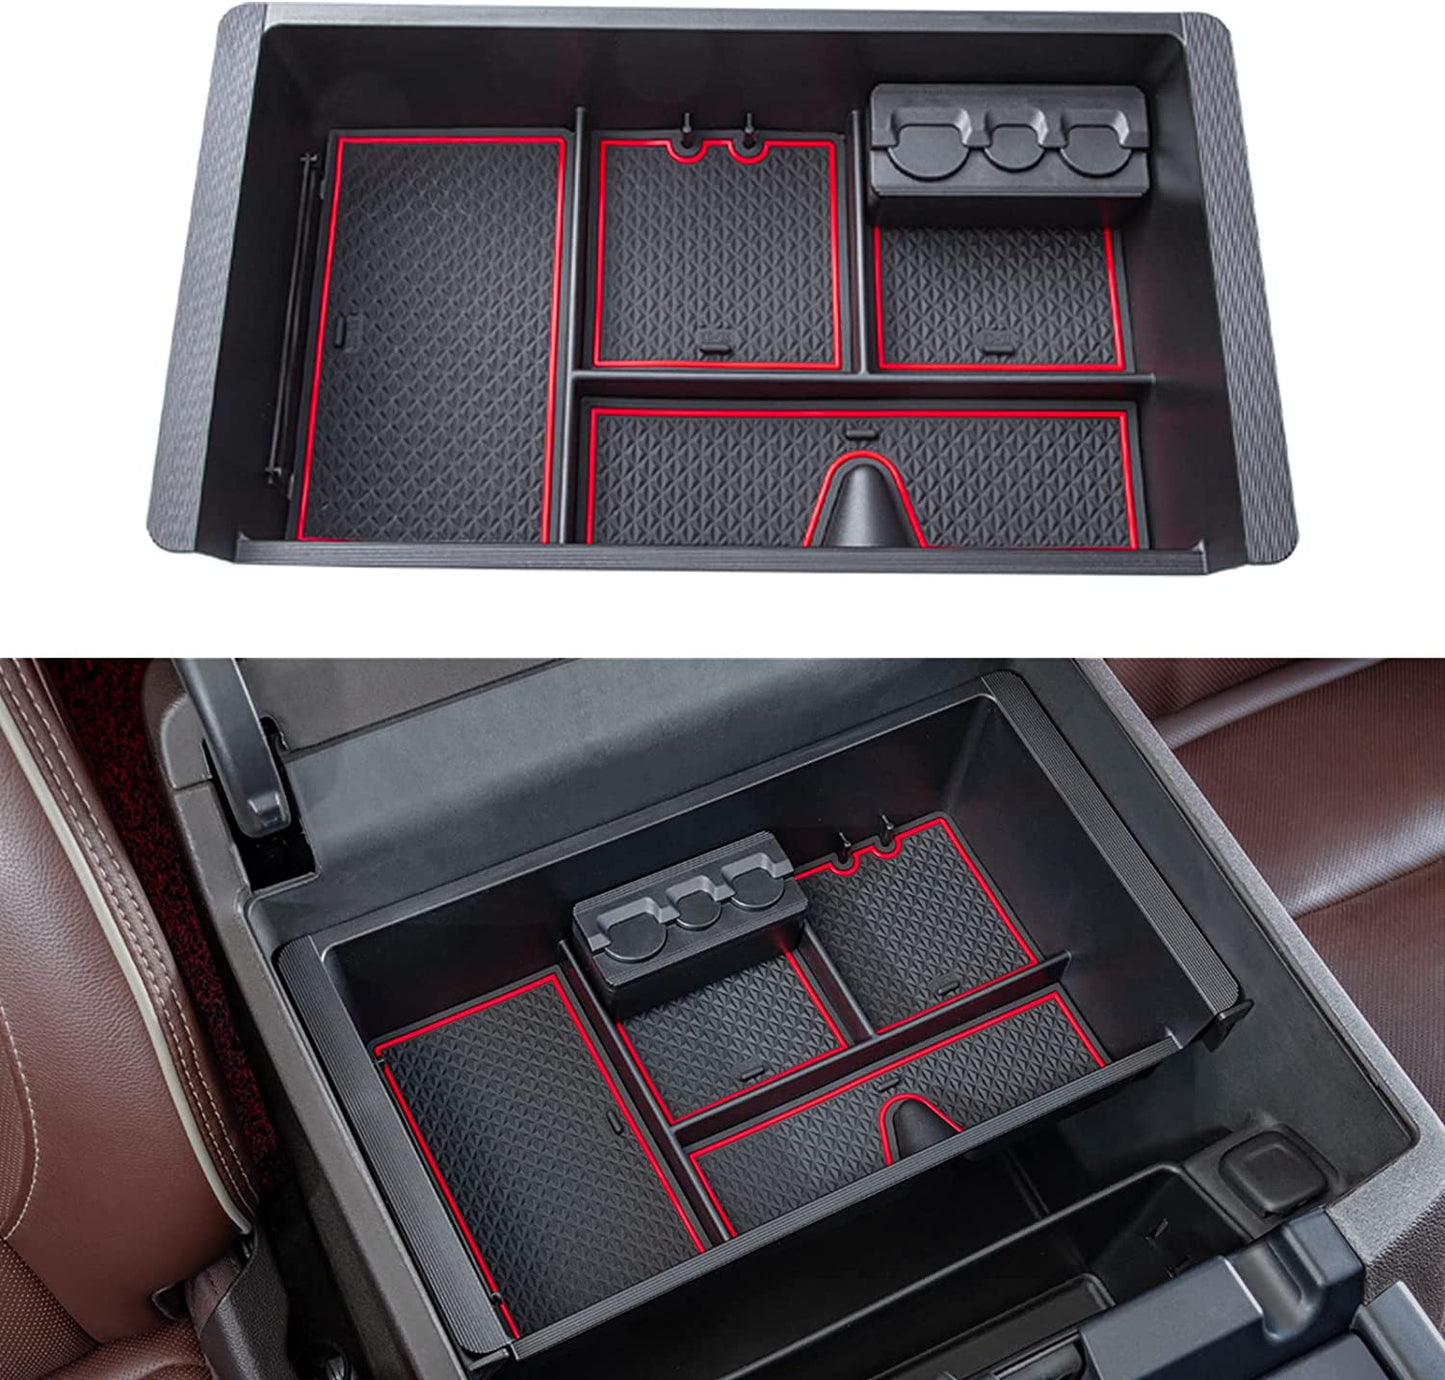 Compatible with Chevy Silverado/GMC Sierra 2014-2018 and Chevy Tahoe Suburban/GMC Yukon 2015-2020 Center Console Organizer Tray Accessories-Full Console w/Bucket Seats ONLY - (Black Trim)